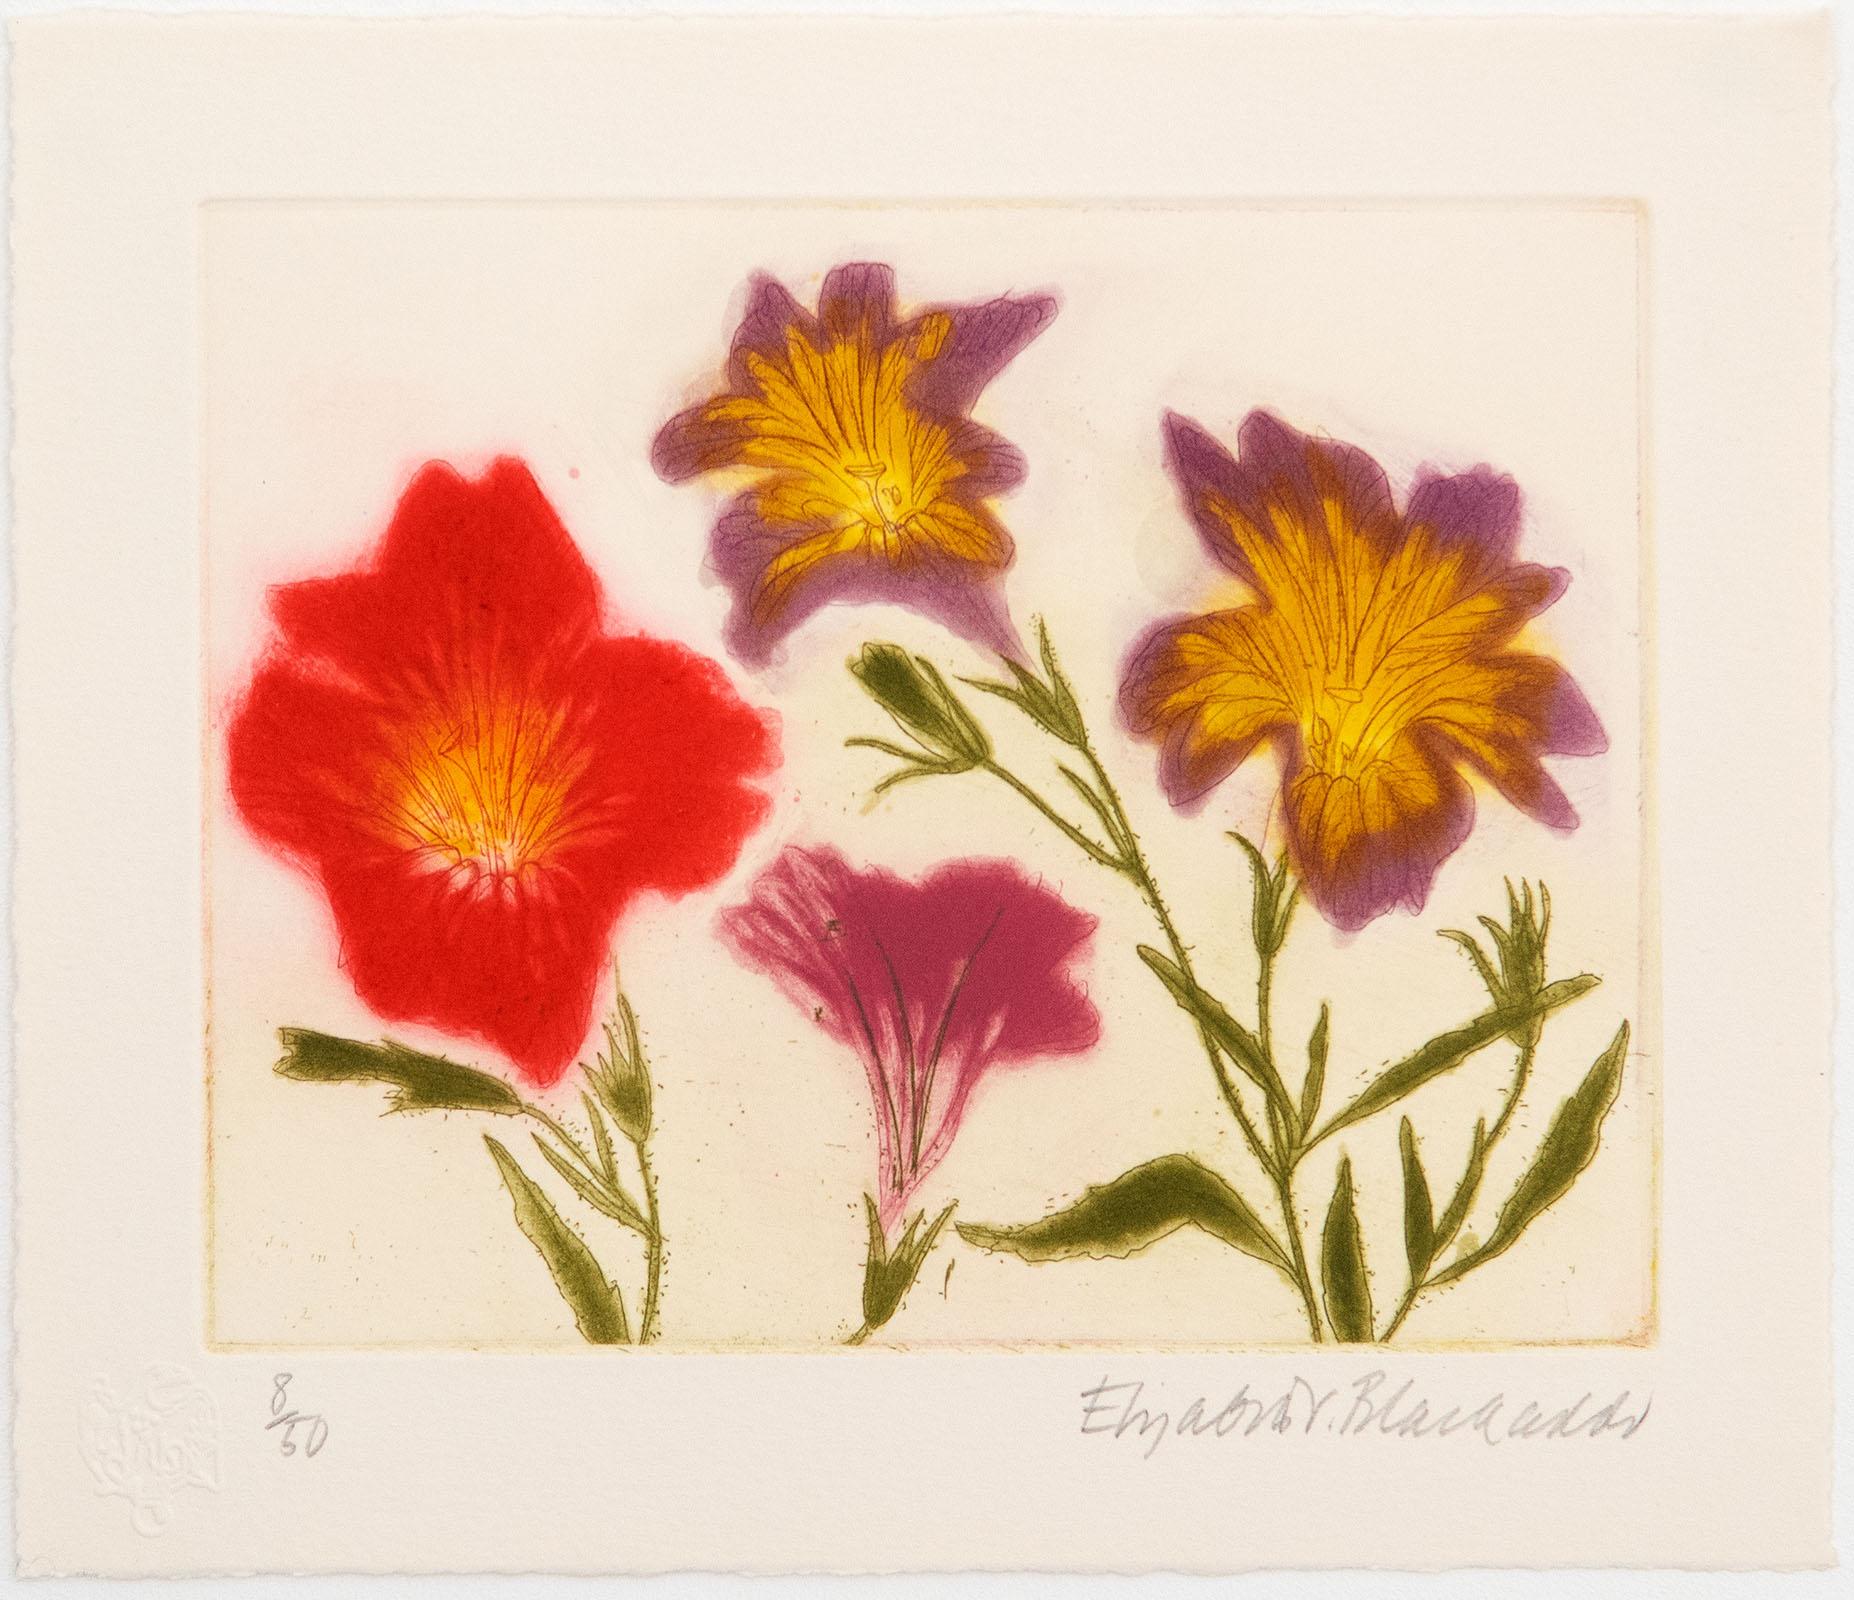 Elizabeth Blackadder Print - 'Favourite Flowers' Limited edition book with signed aquatint 'Salpiglossis'